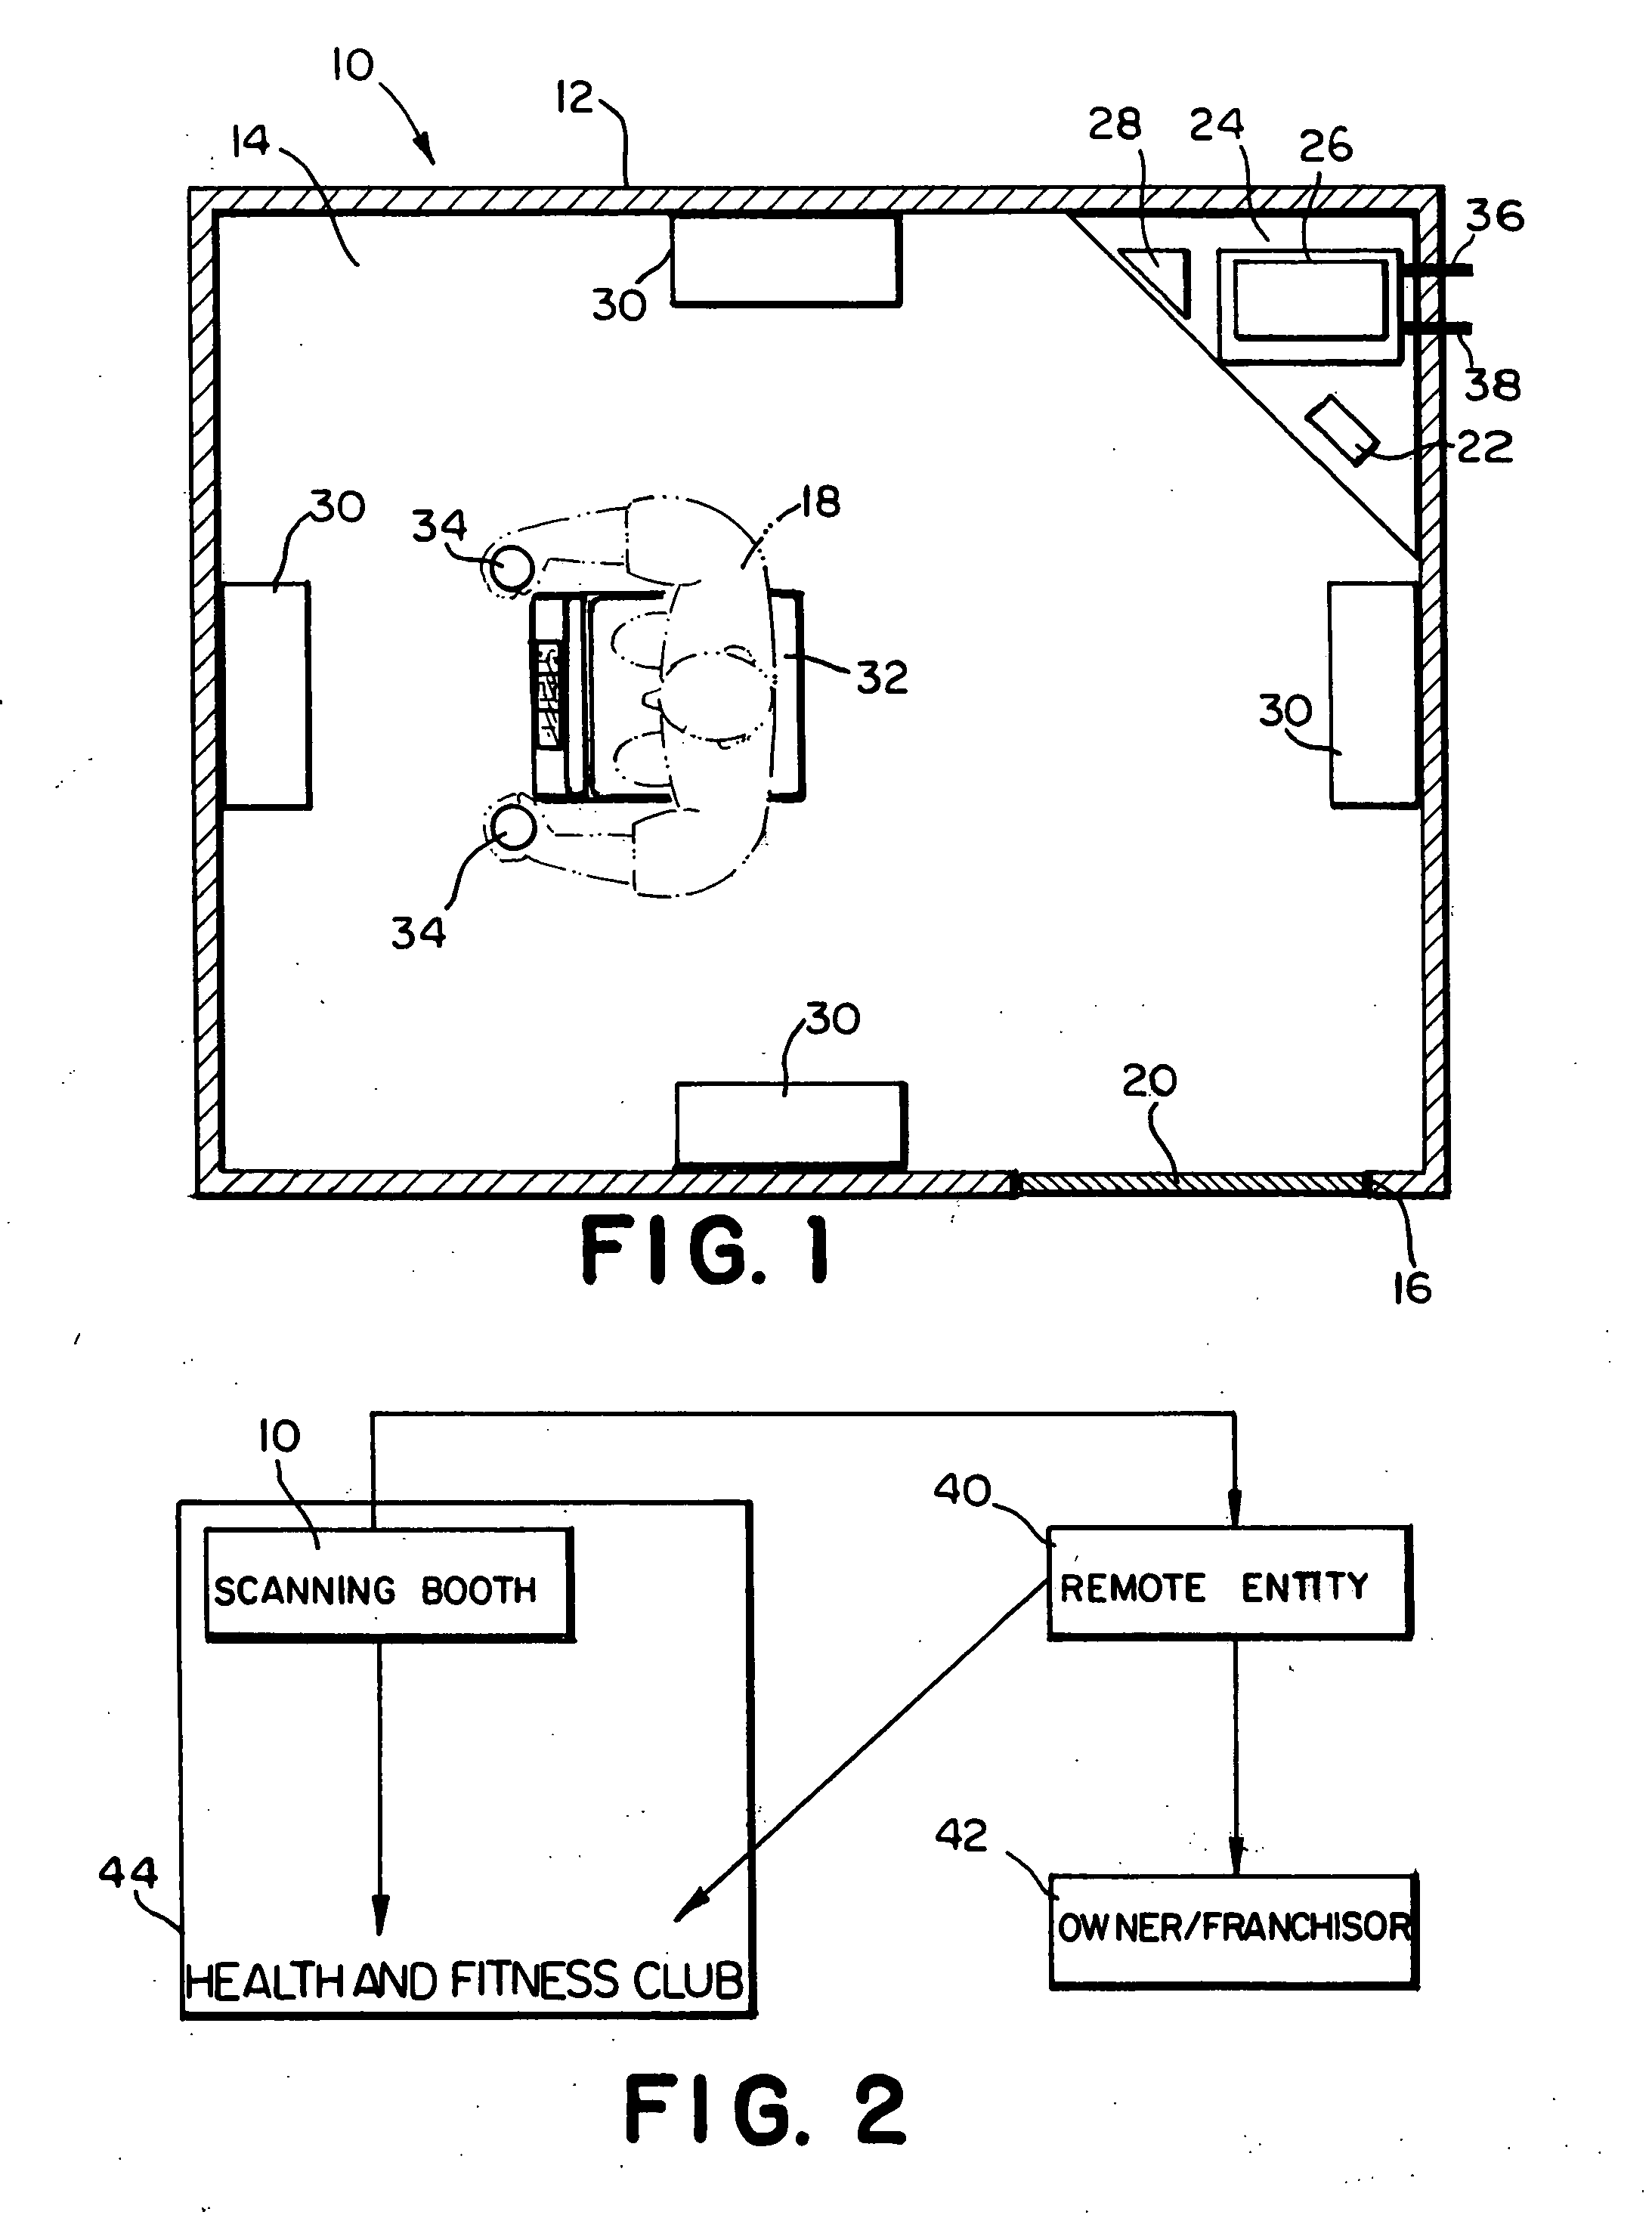 Apparatus and method for acquiring and processing data regarding physical attributes of a user